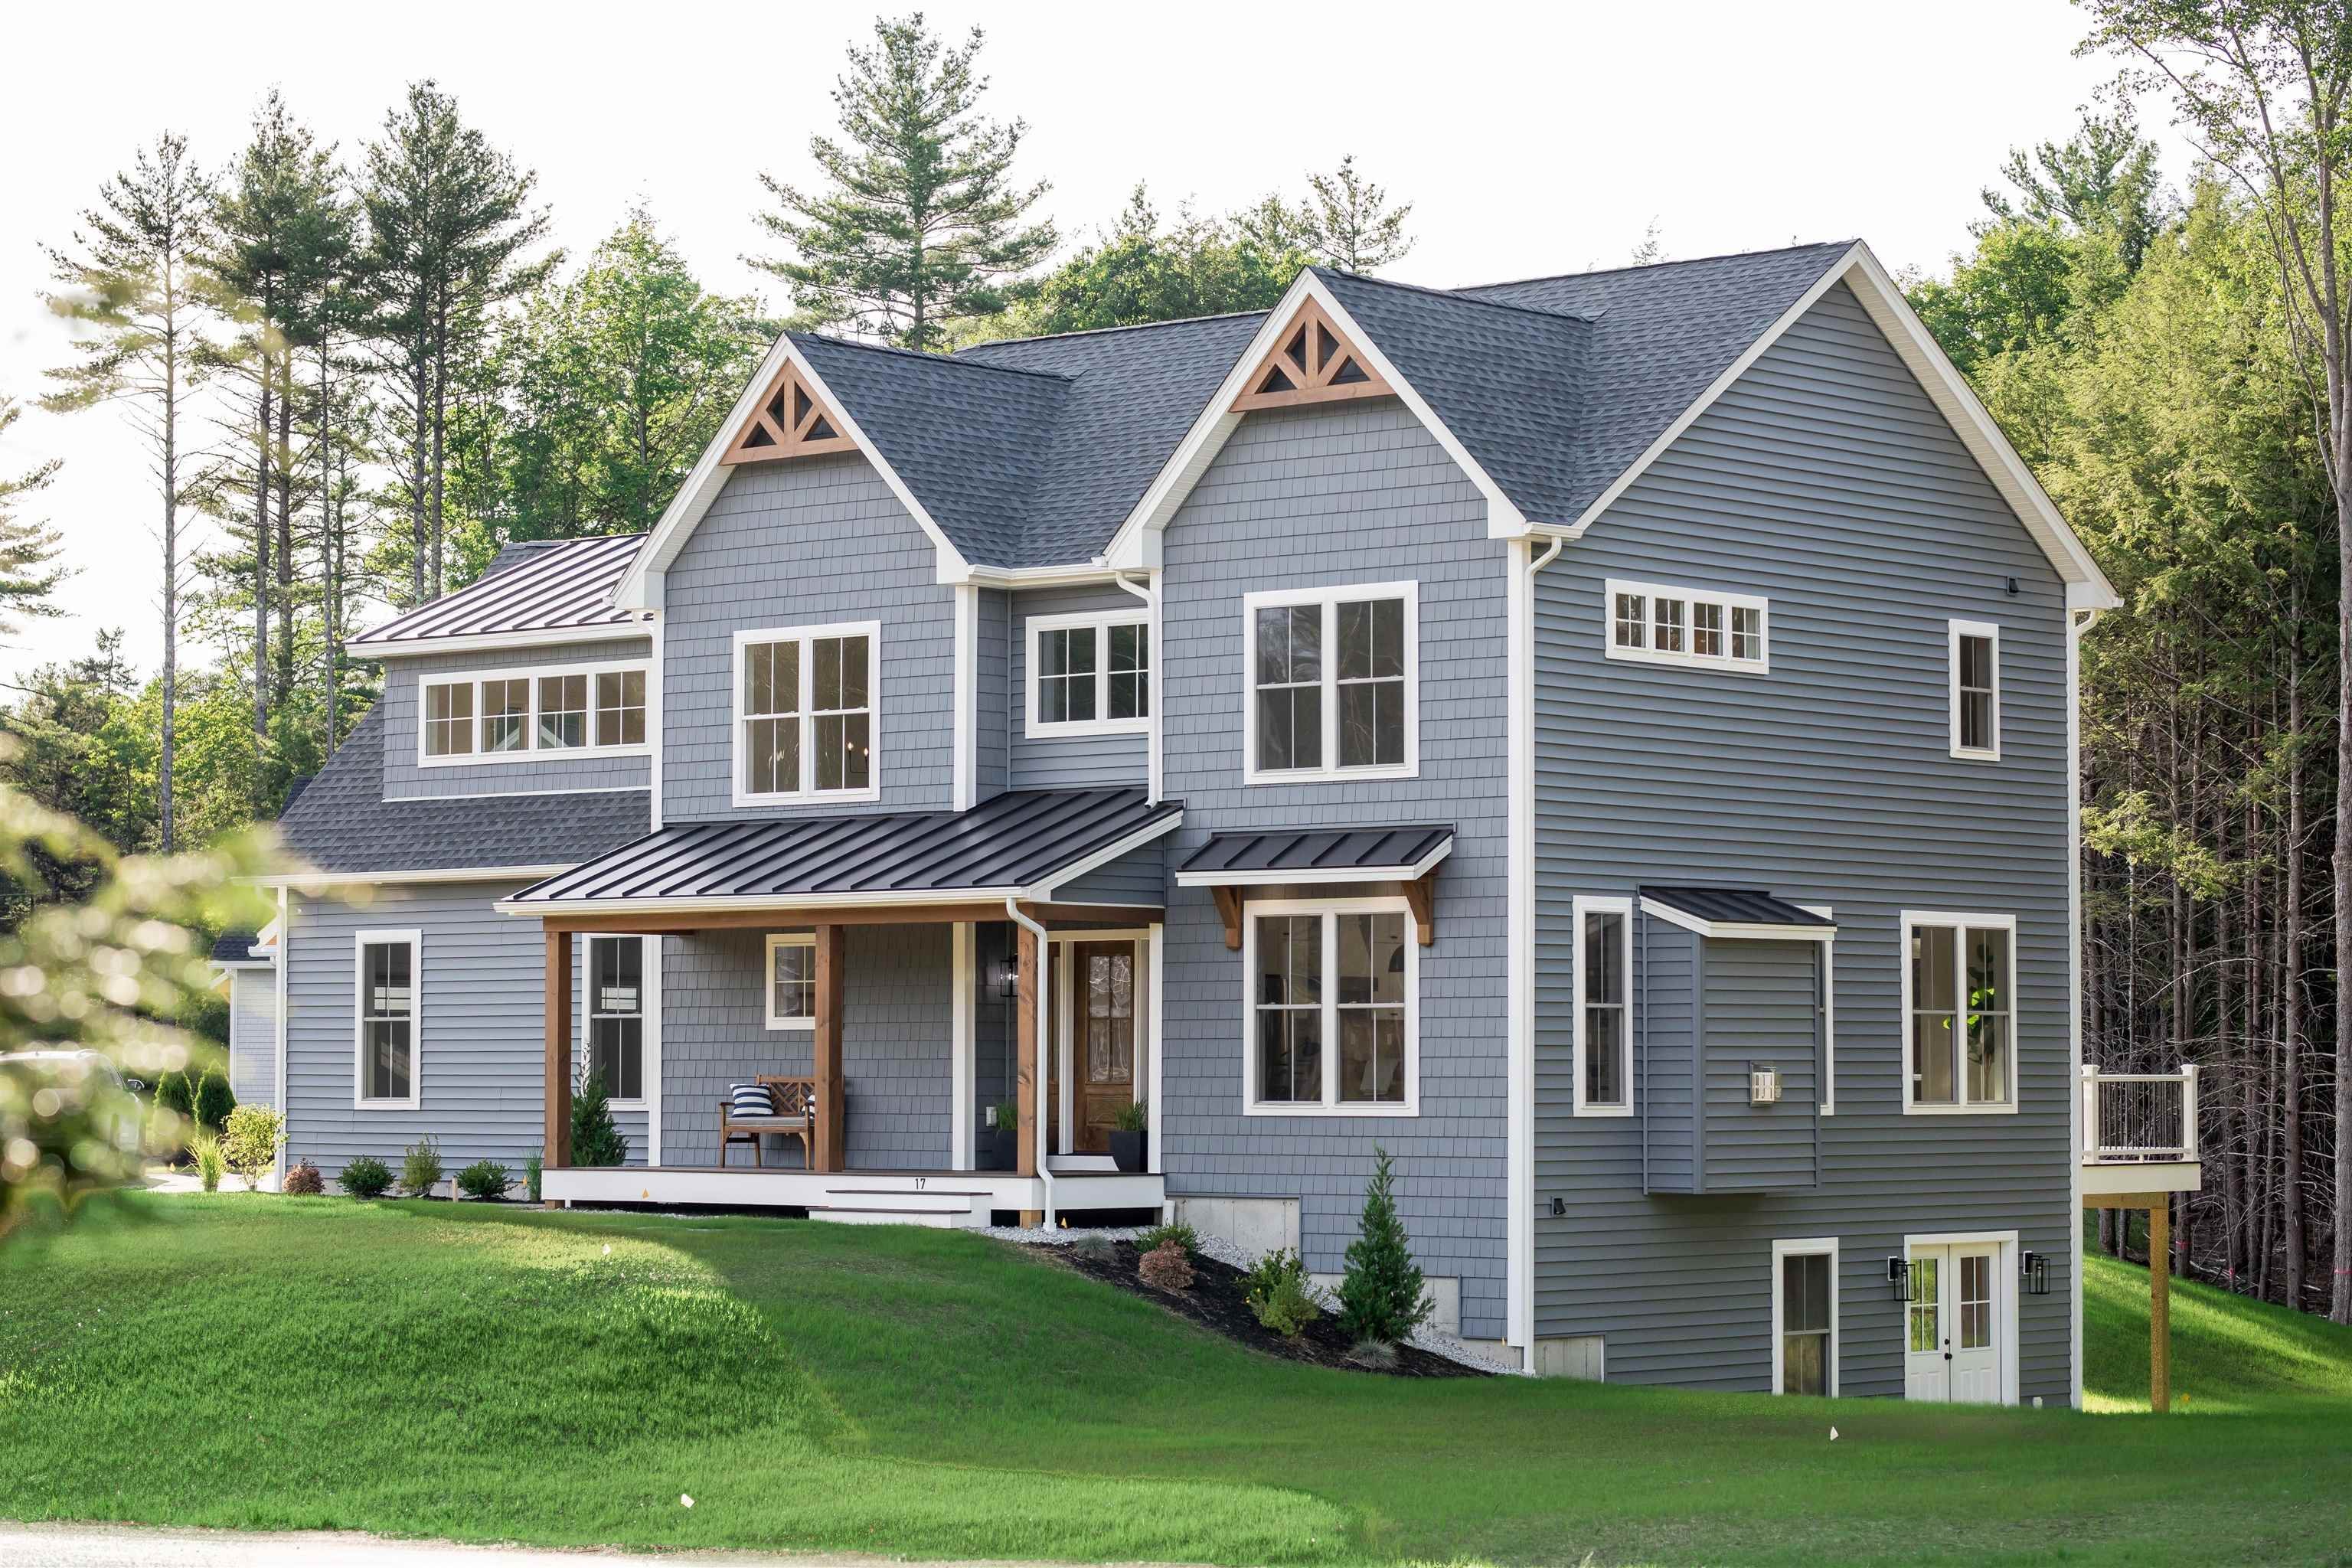 Single Family Homes for Sale at Rindge, NH 03461